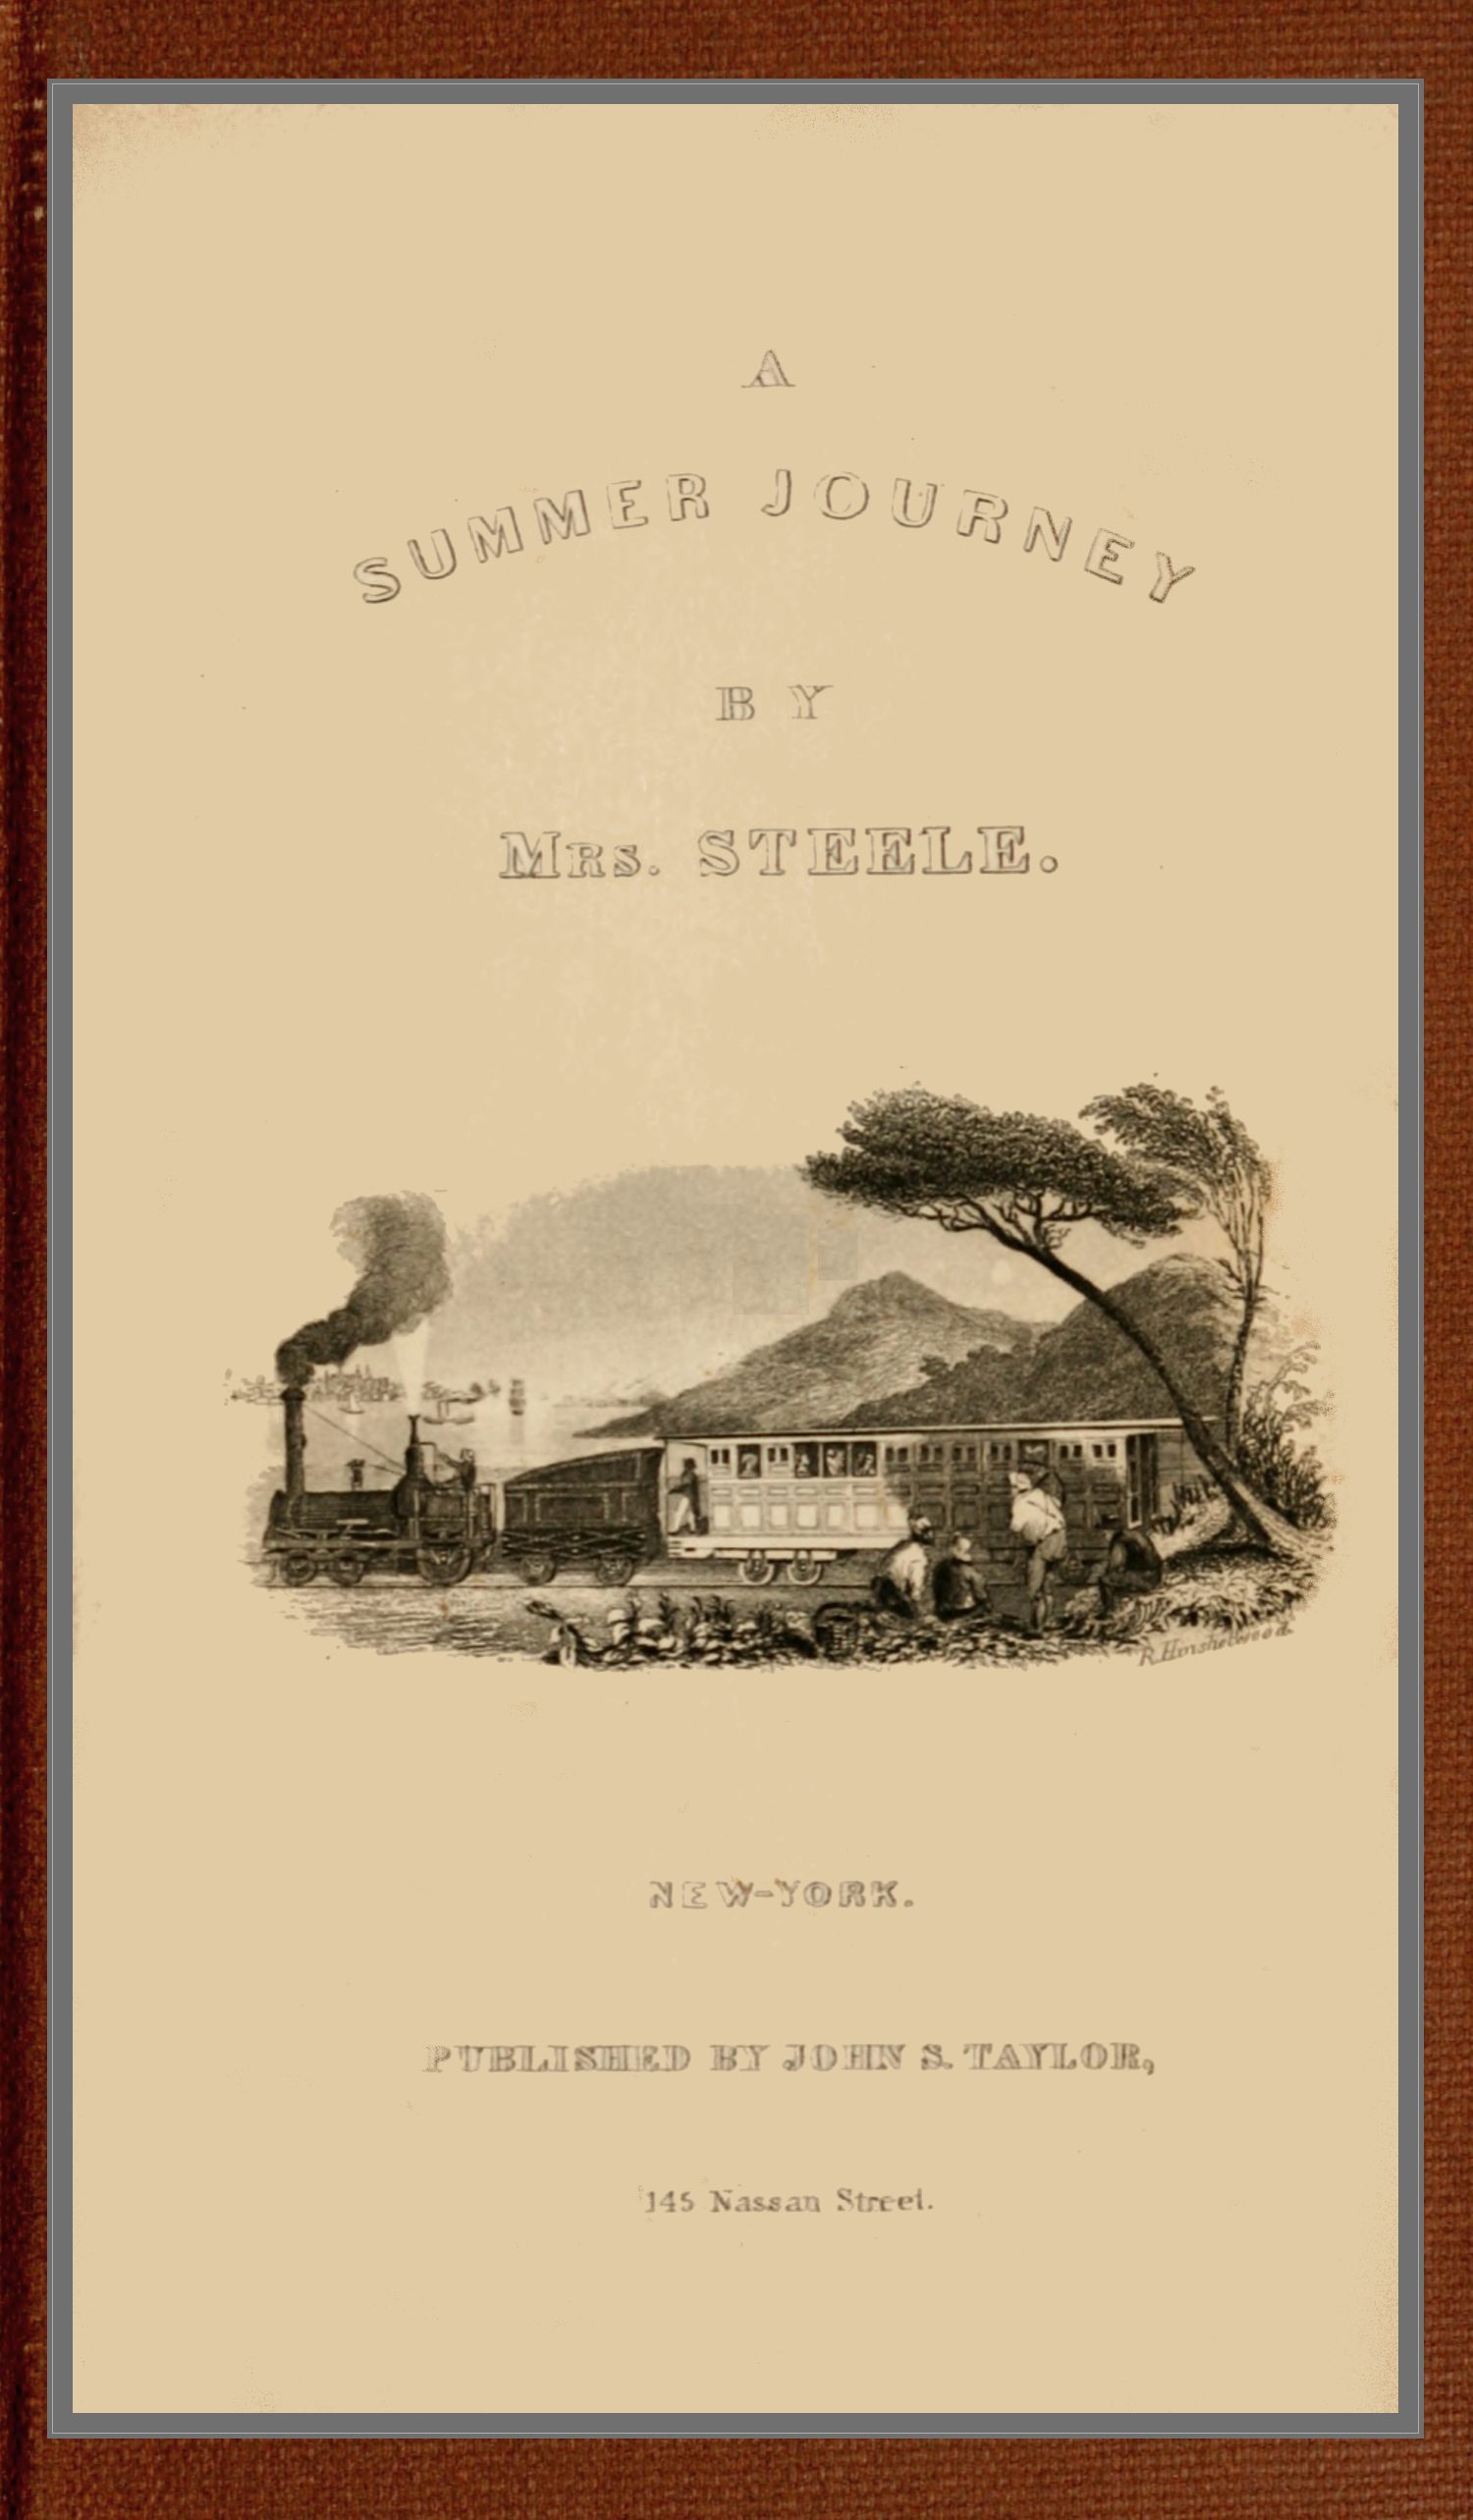 The Project Gutenberg eBook of A Summer journey in the West, by Mrs. Steele.